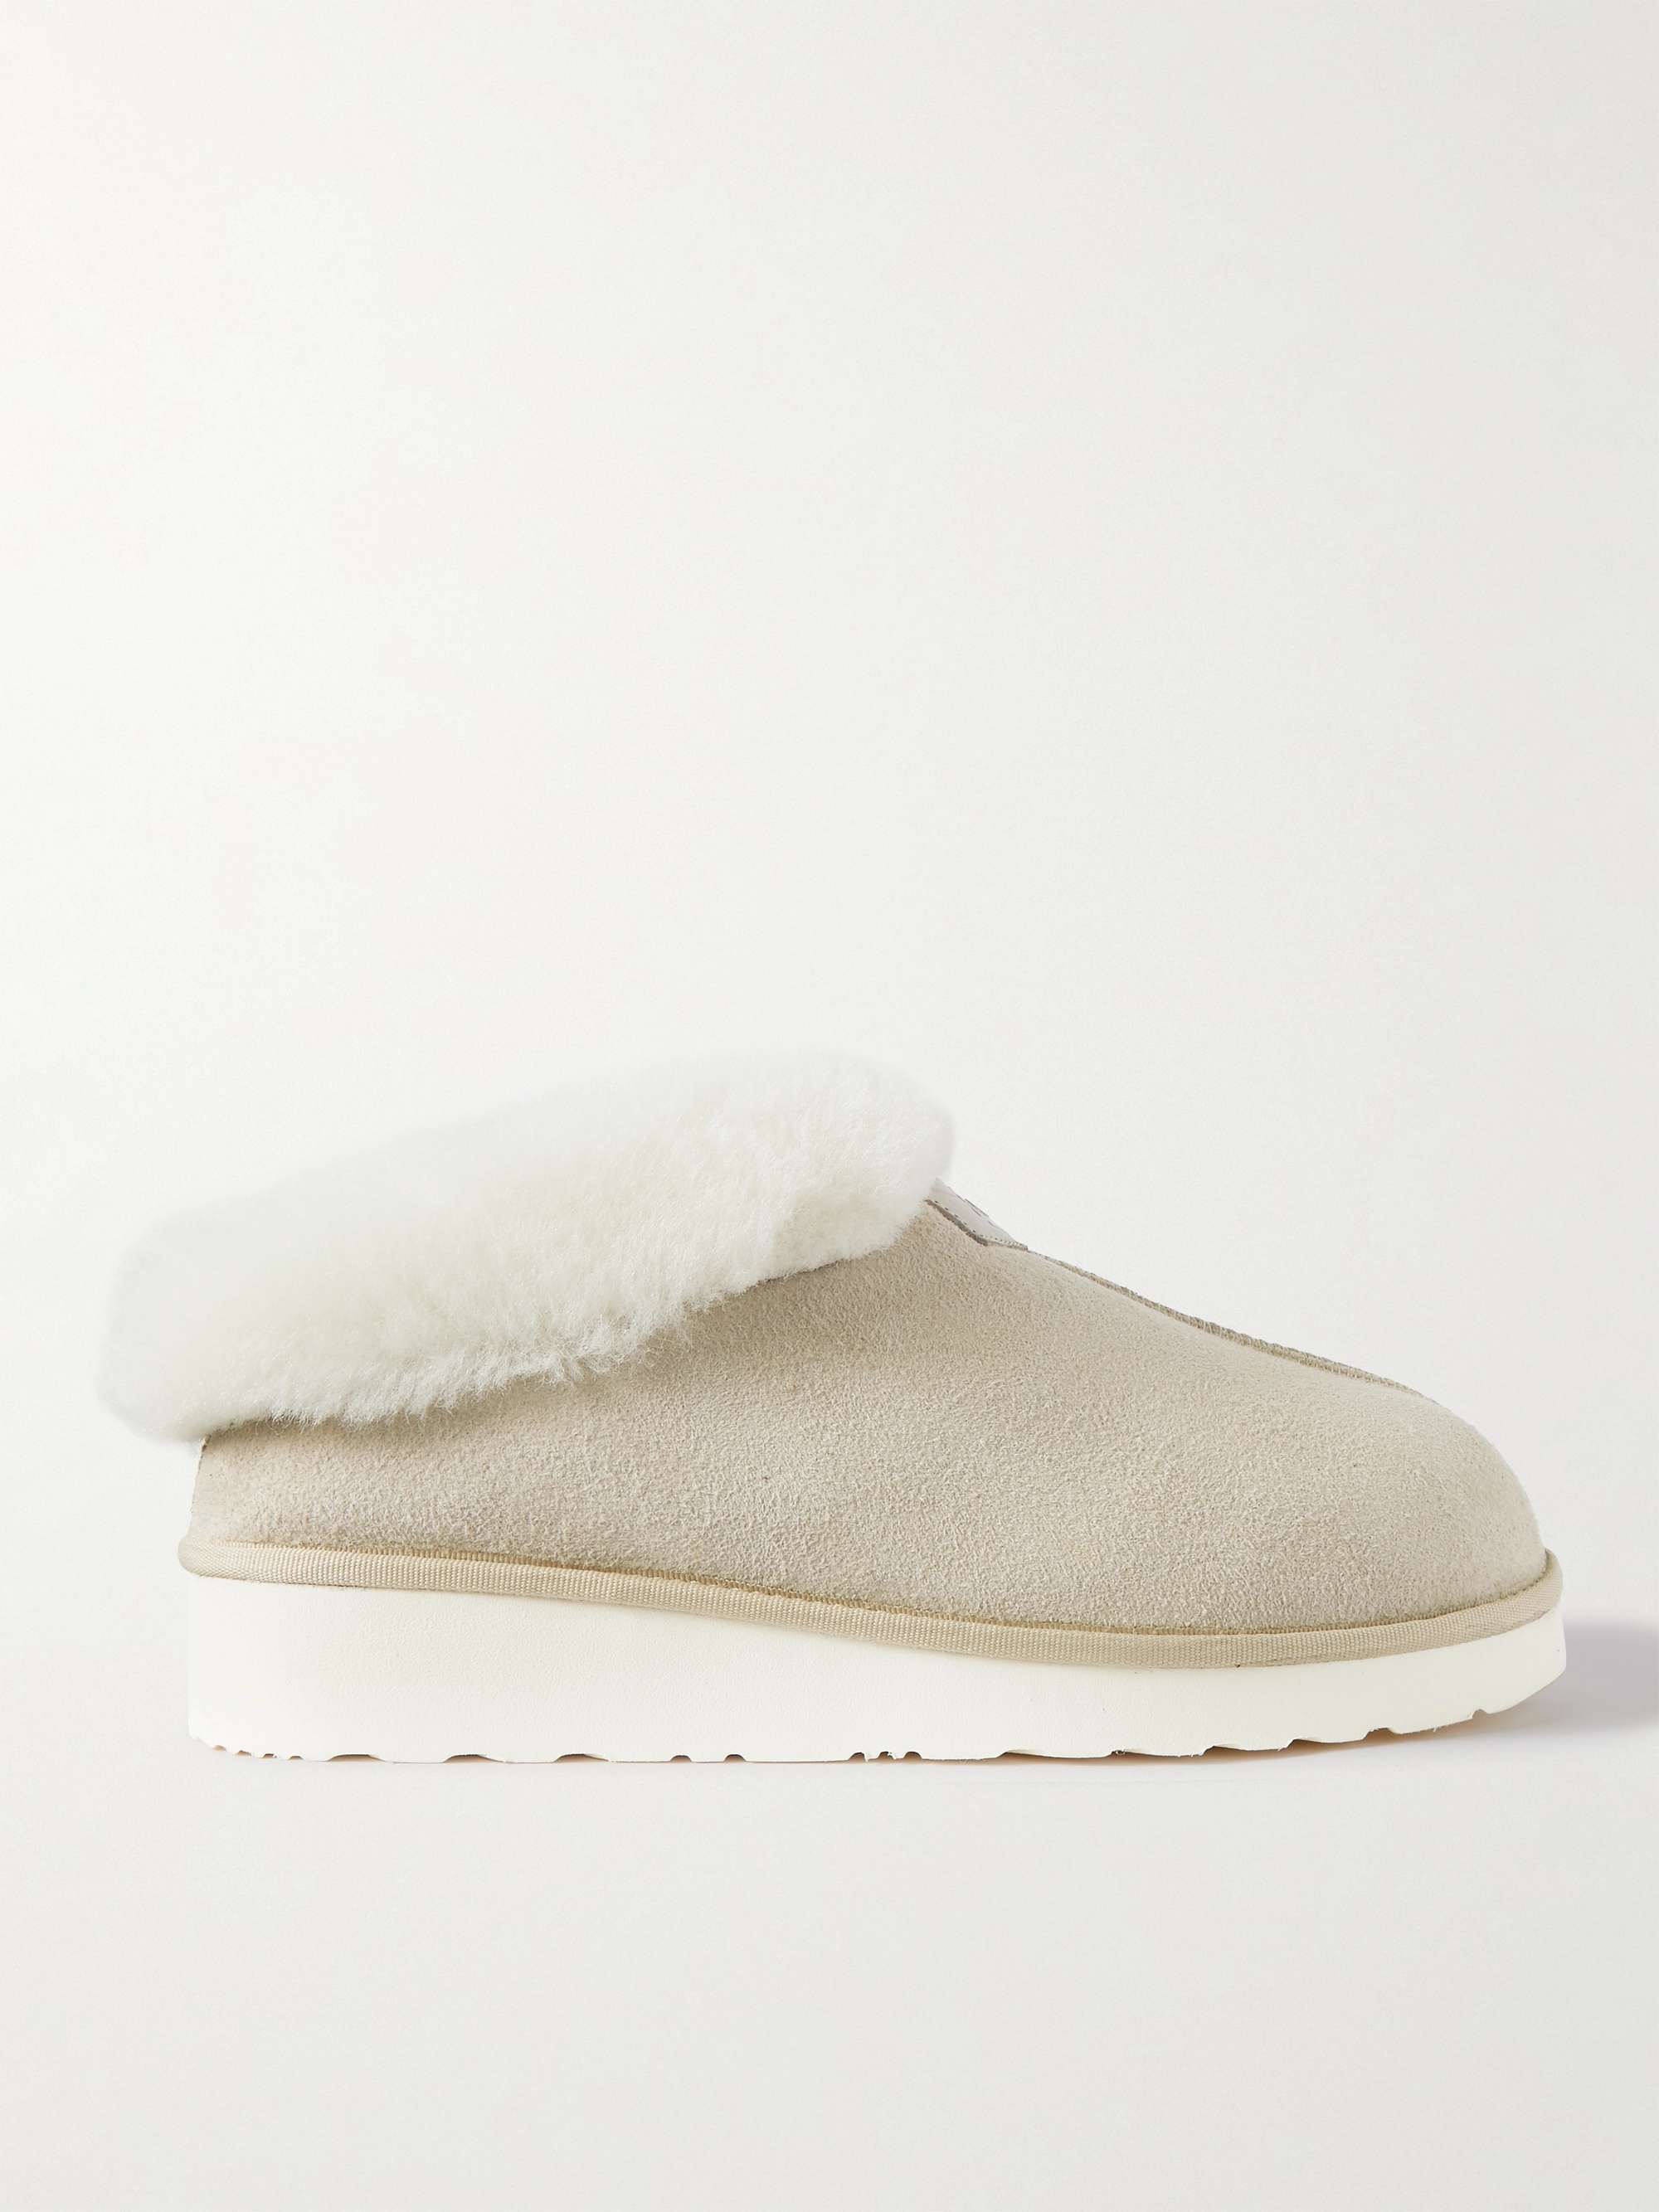 GRENSON Wyeth Shearling-Lined Suede Slippers for Men | MR PORTER